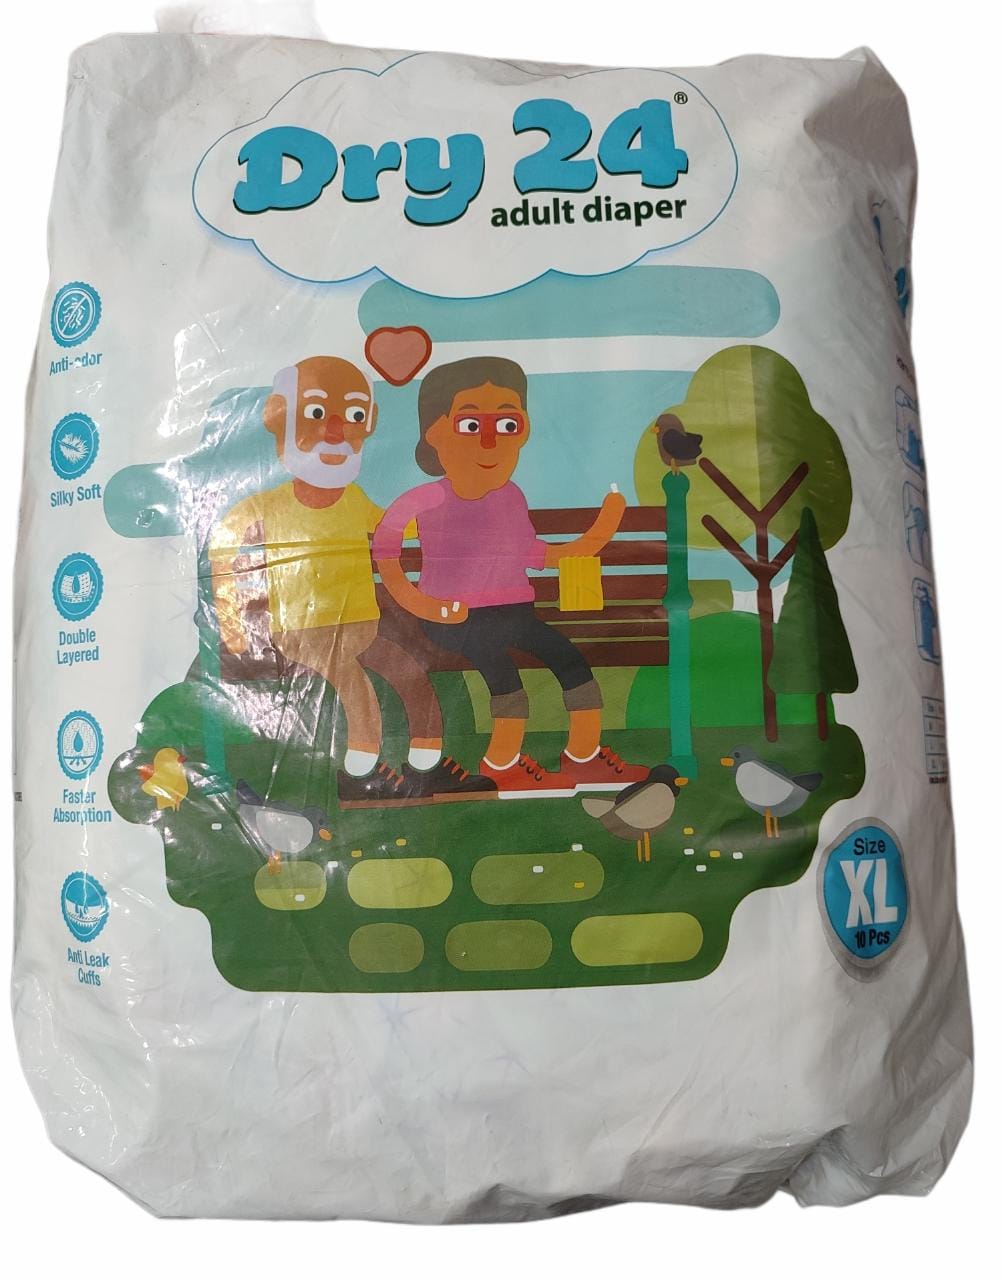 Dry 24 Adult Diaper Karma Healthcare Limited